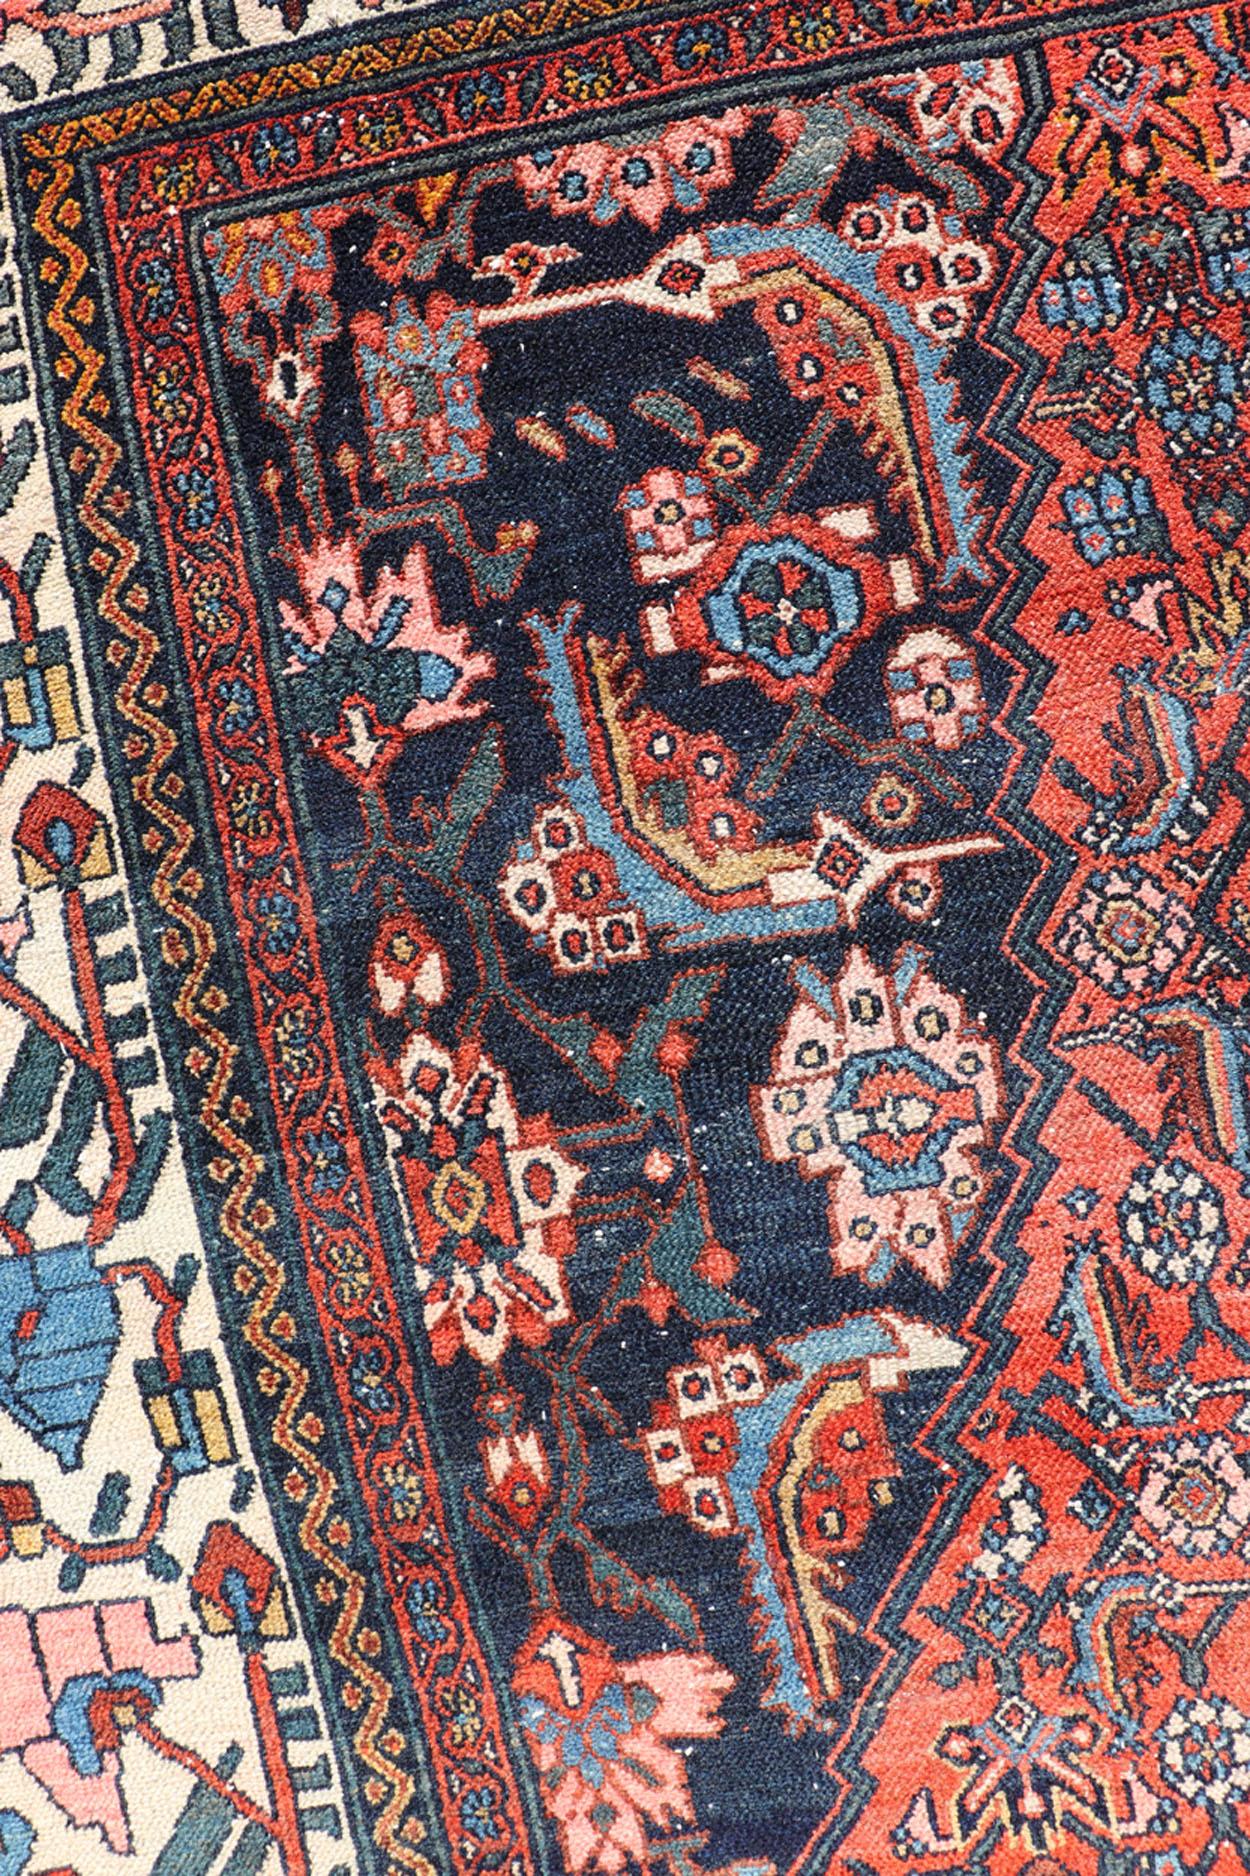 20th Century Finely Woven Large Antique Persian Gallery Rug in Rich Blue, Brick Red For Sale